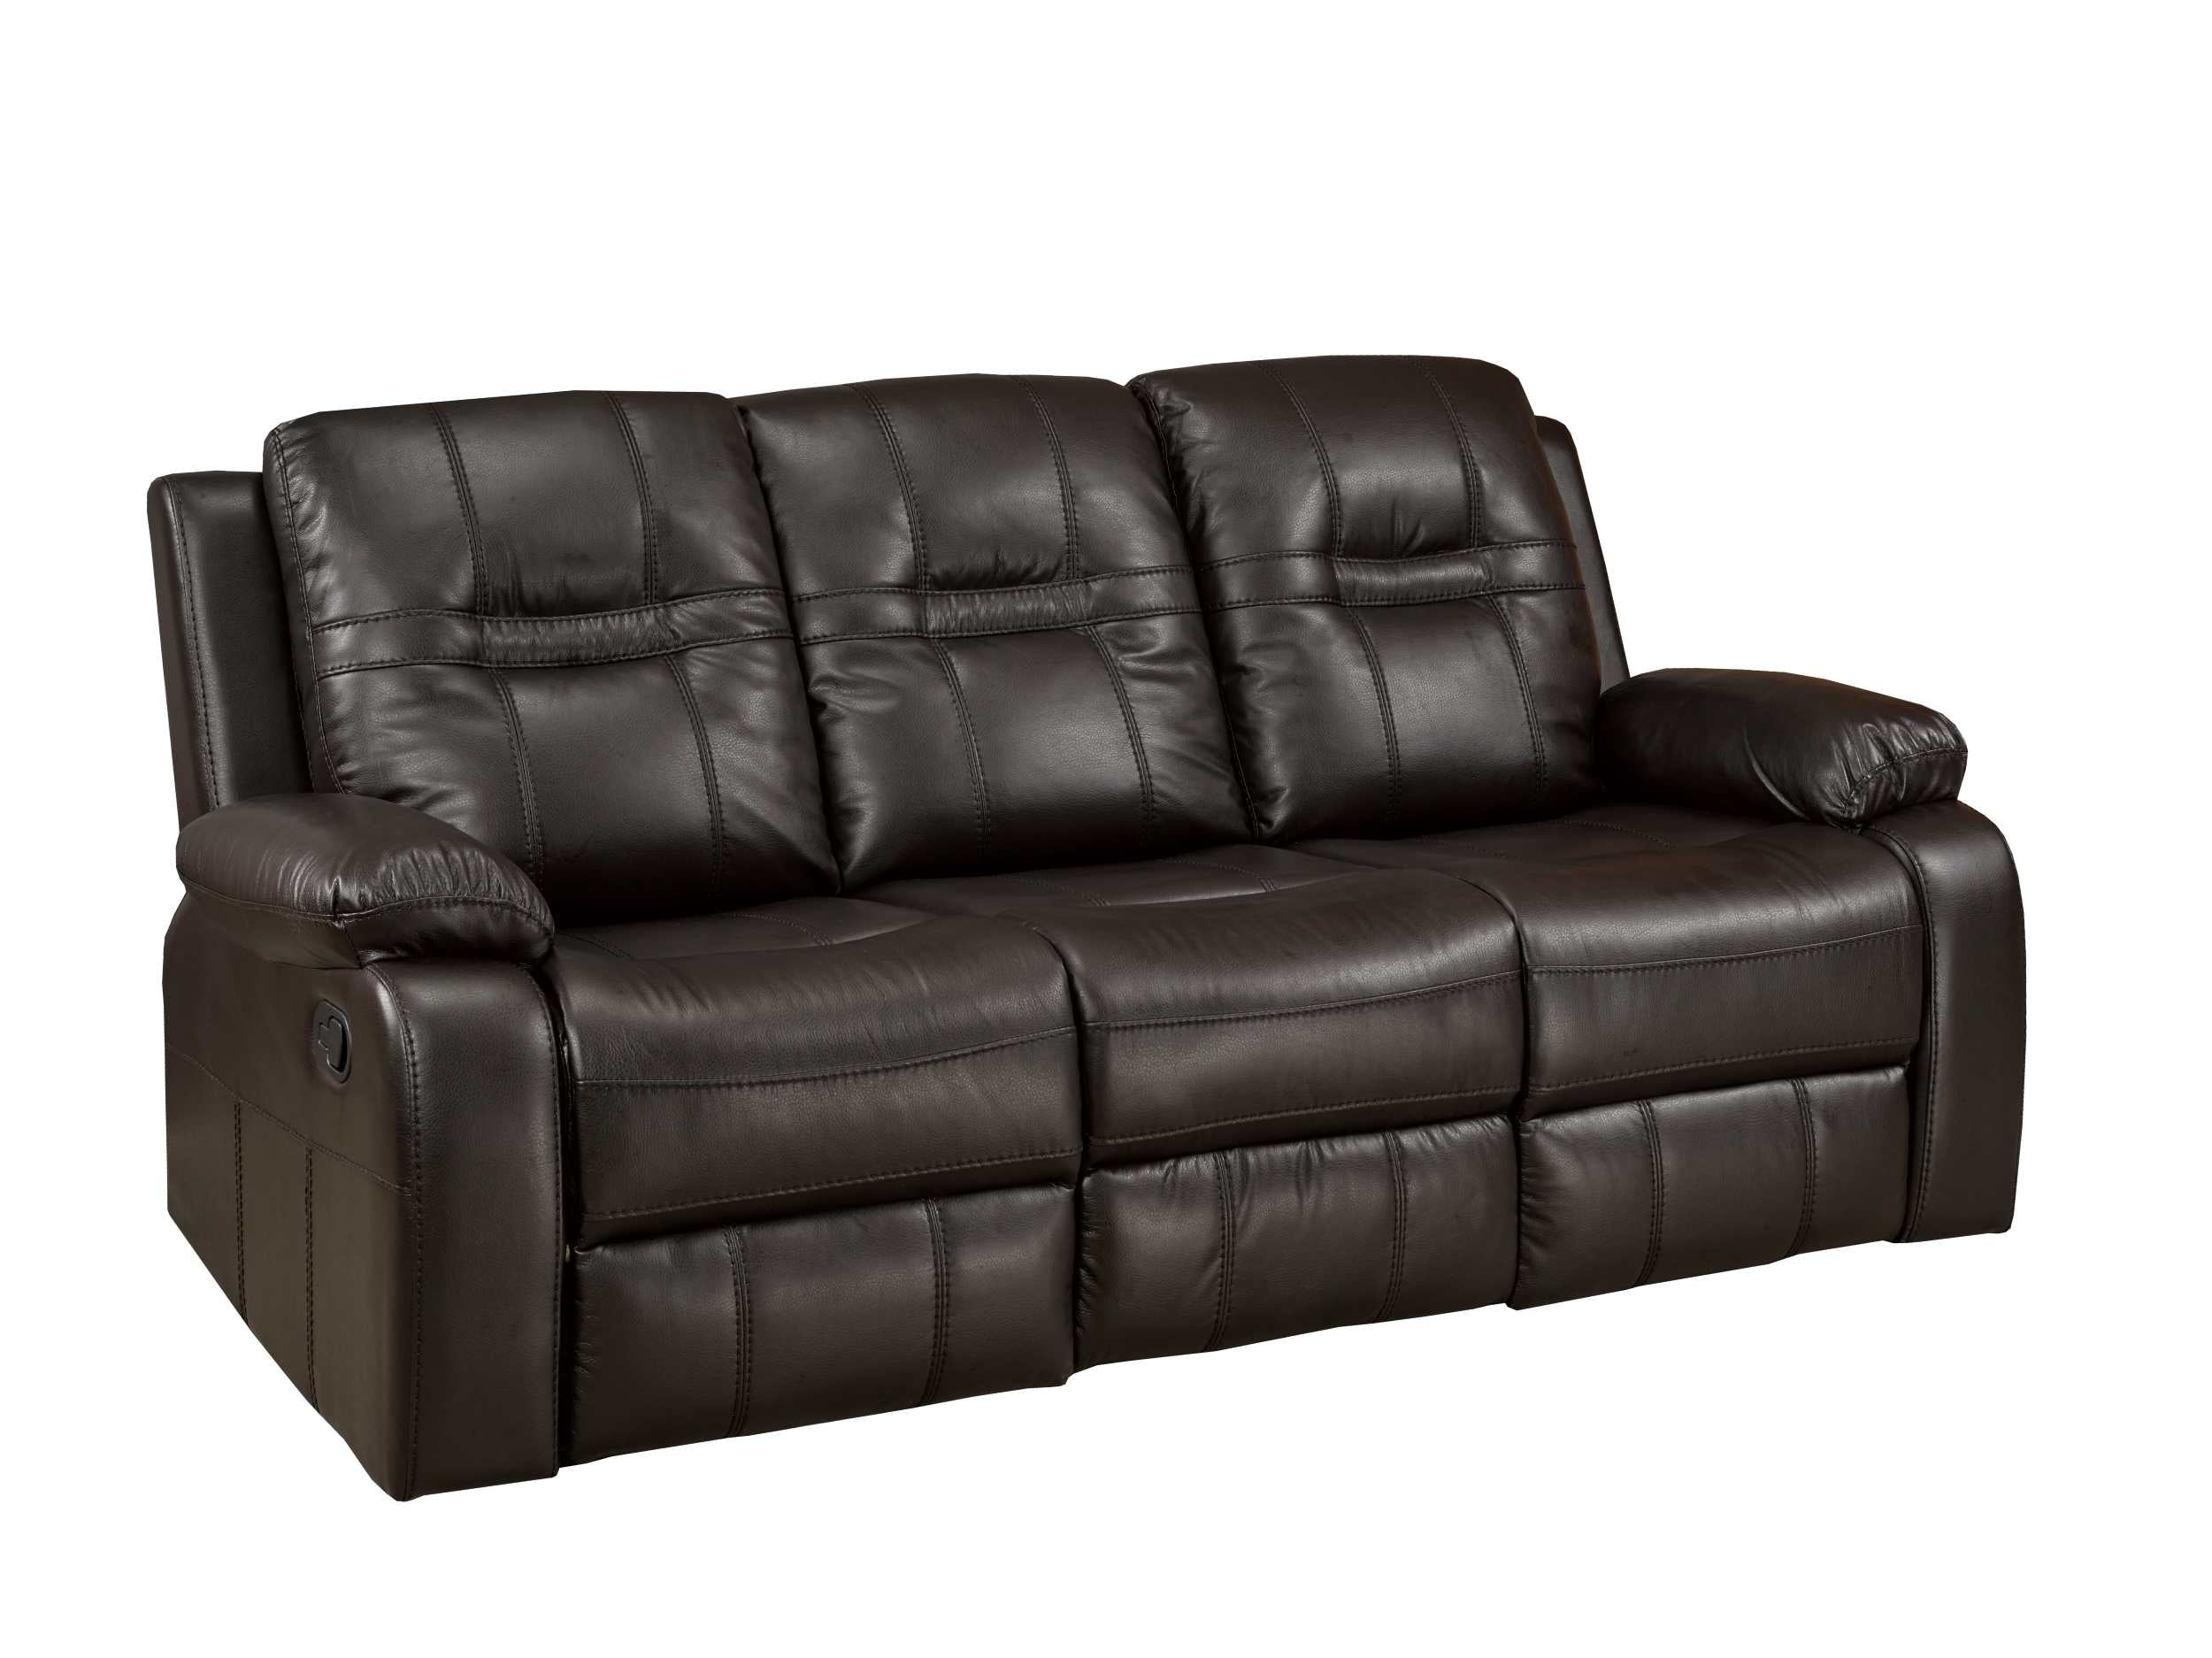 Napolean Air Leather Chocolate Recliner Collection 6015